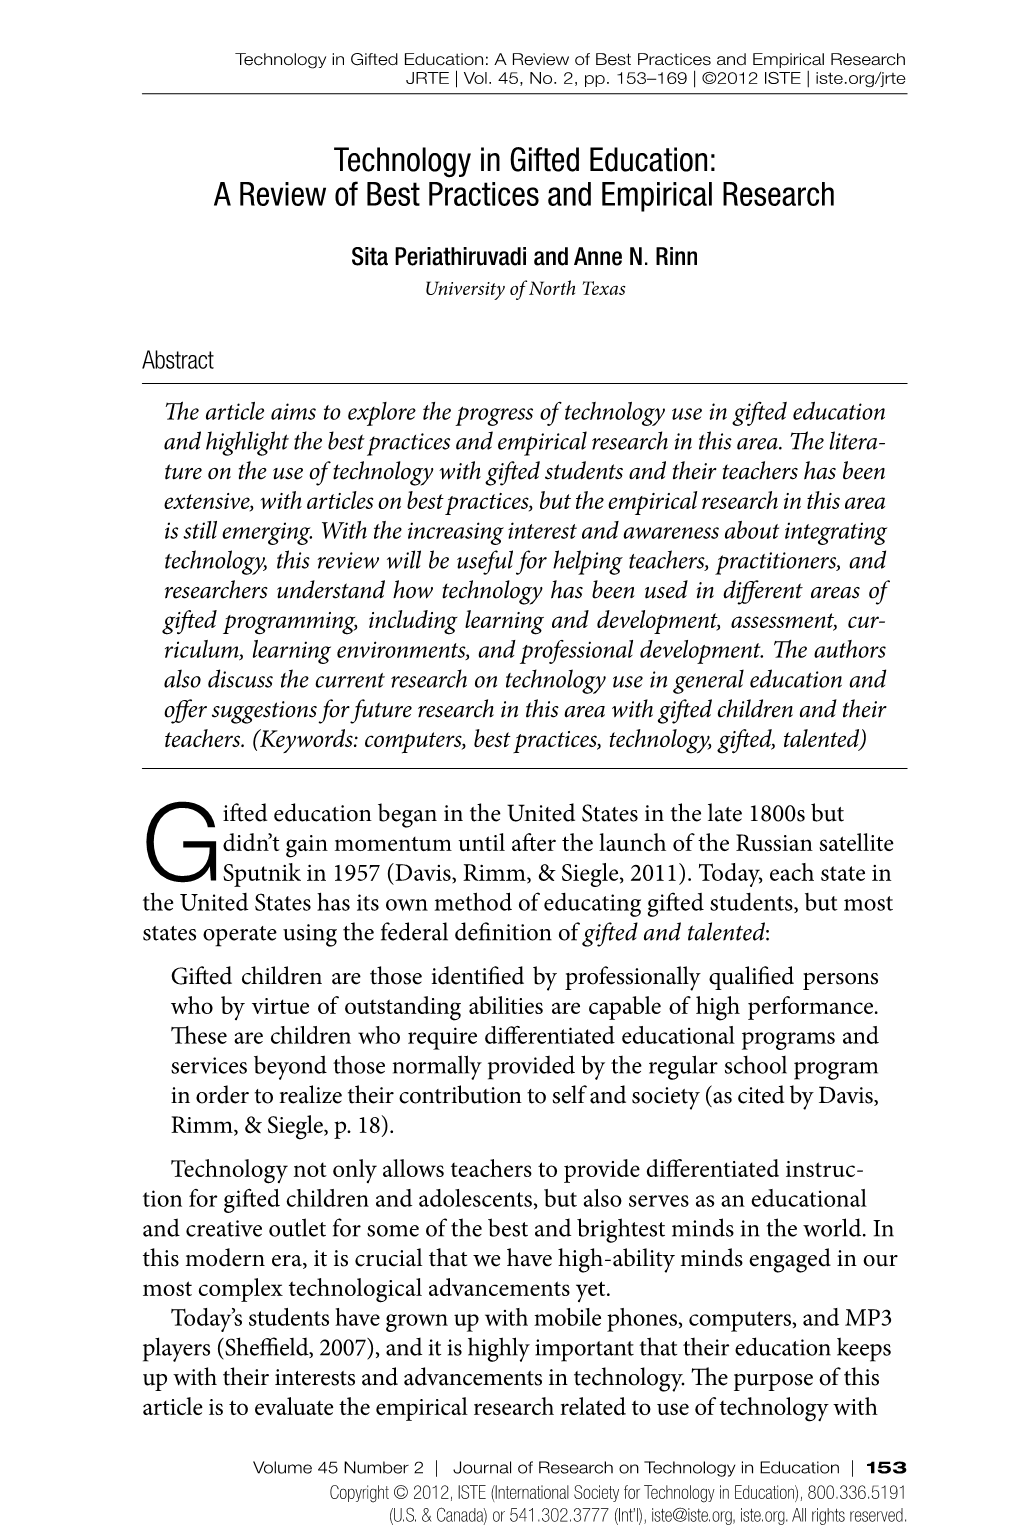 Technology in Gifted Education: a Review of Best Practices and Empirical Research JRTE | Vol